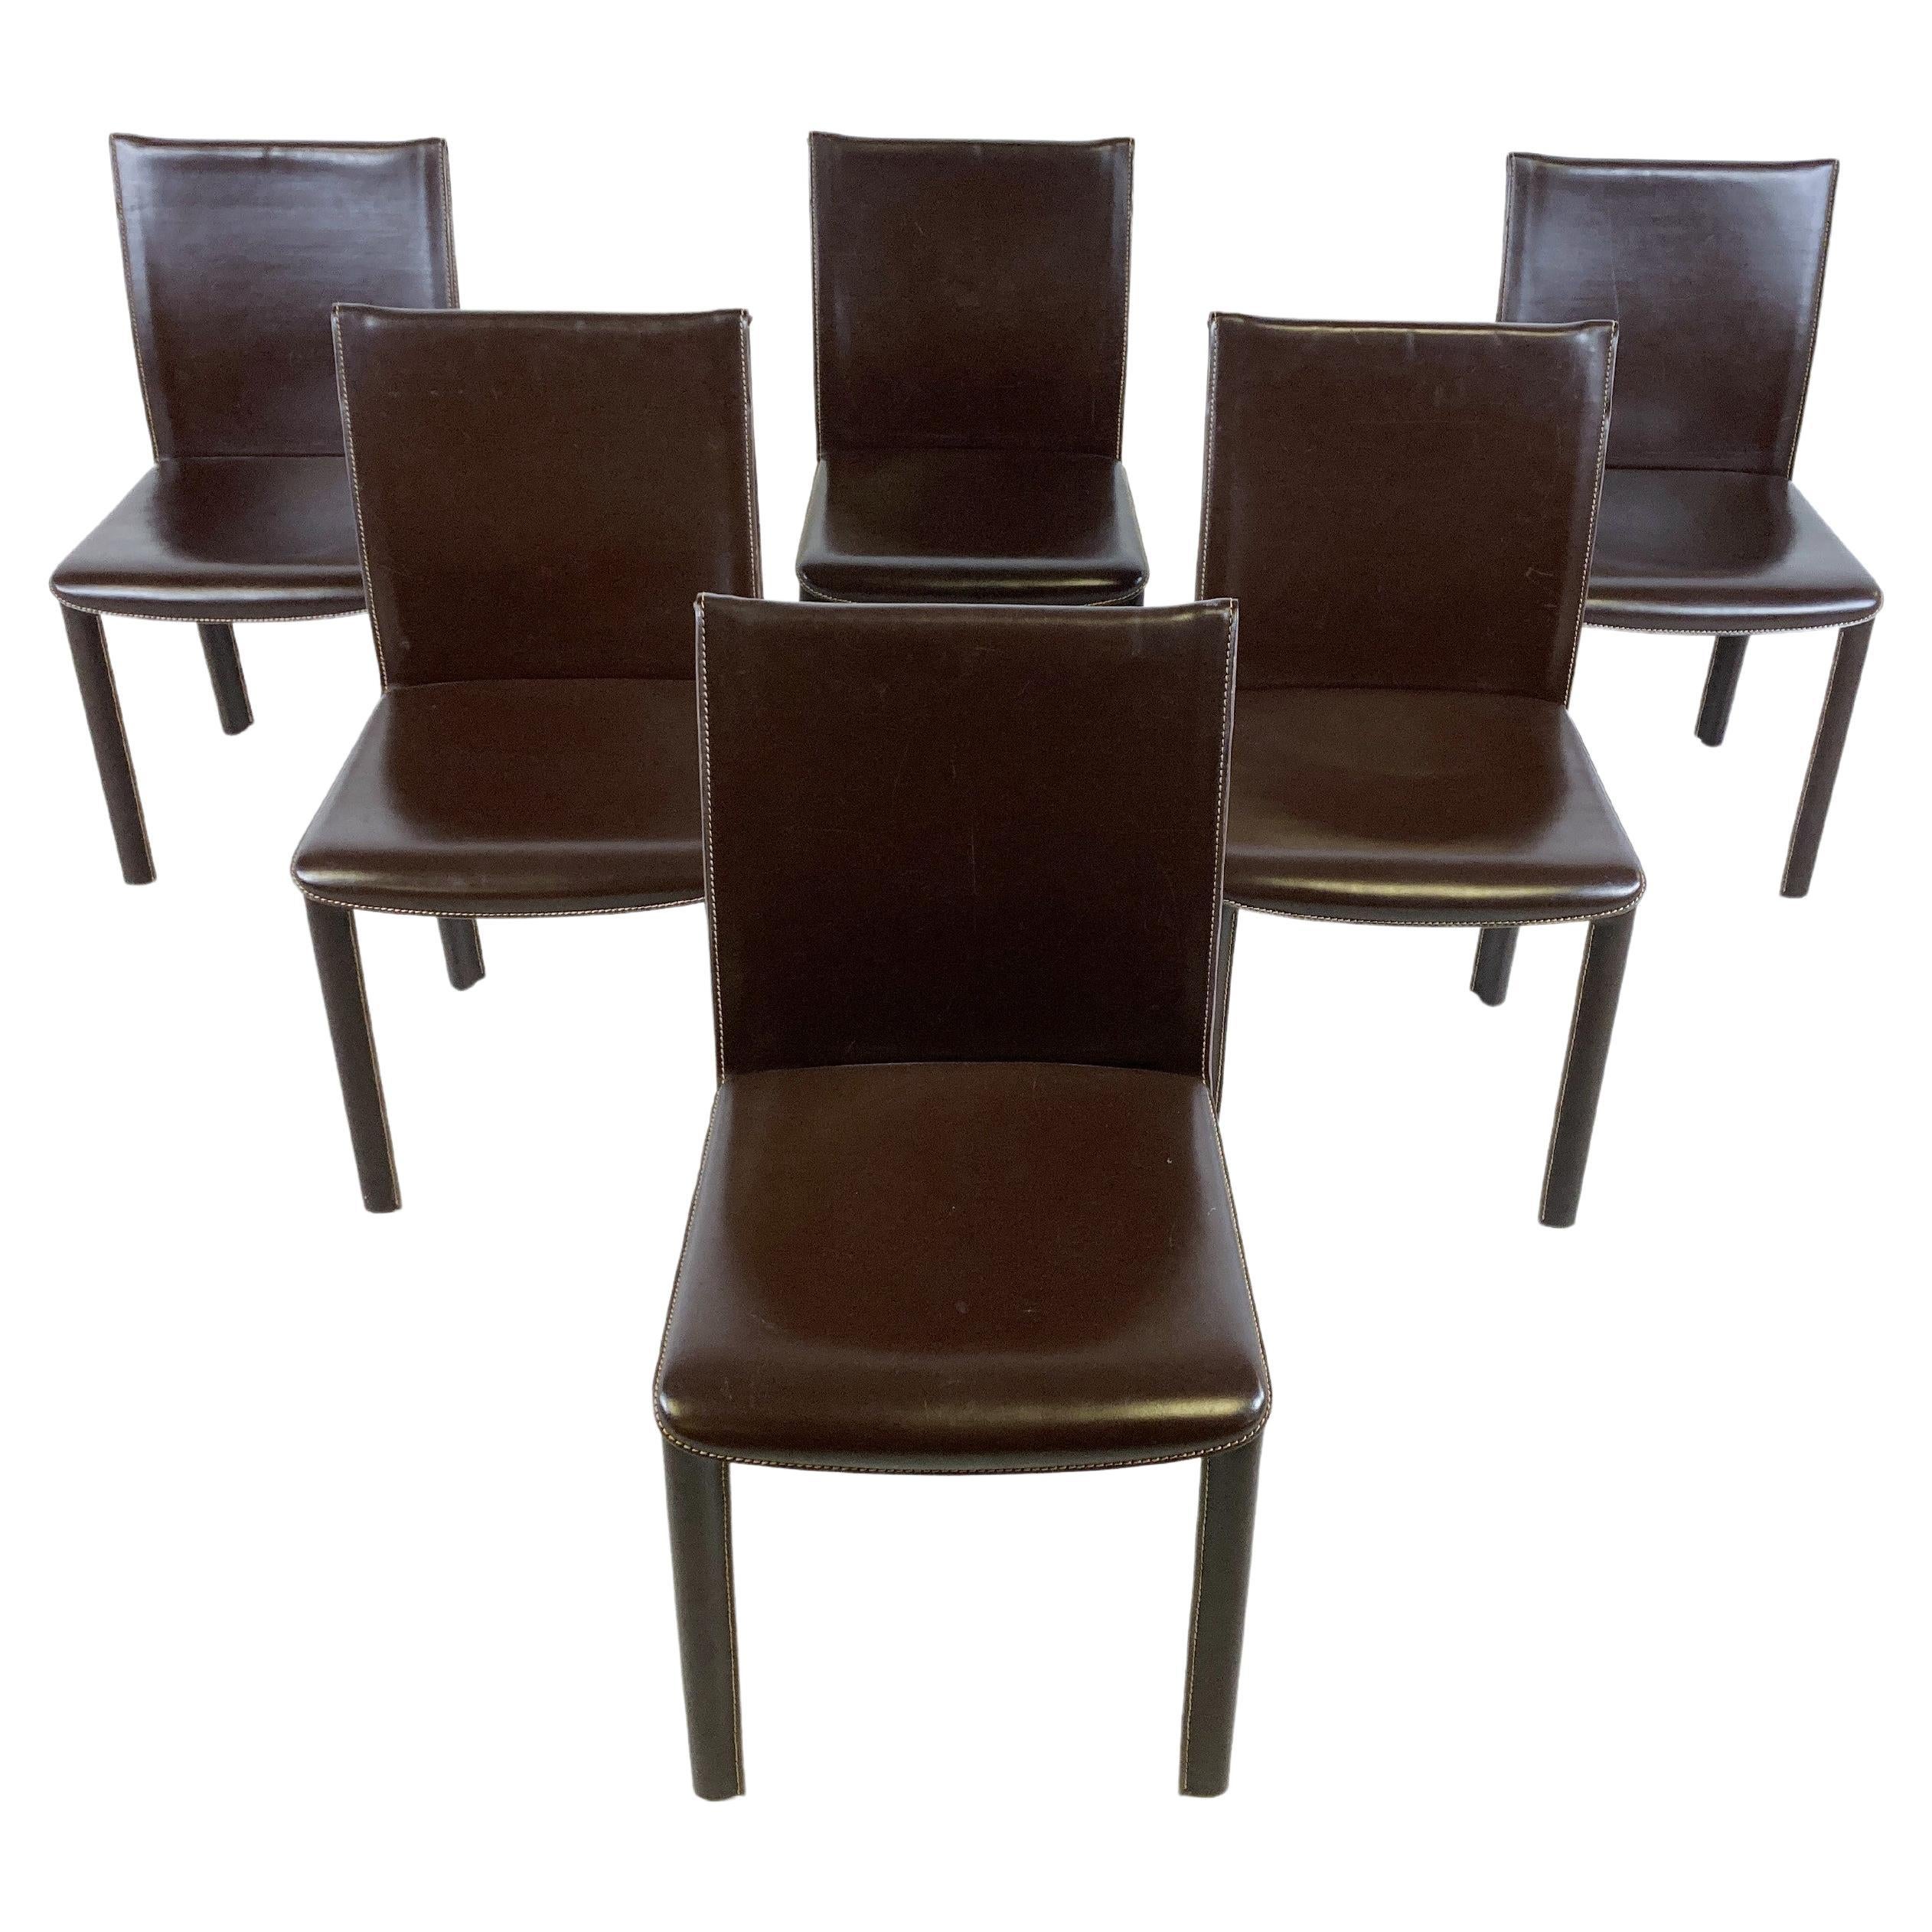 Vintage Brown Leather Dining Chairs by Arper, Italy, 1980s